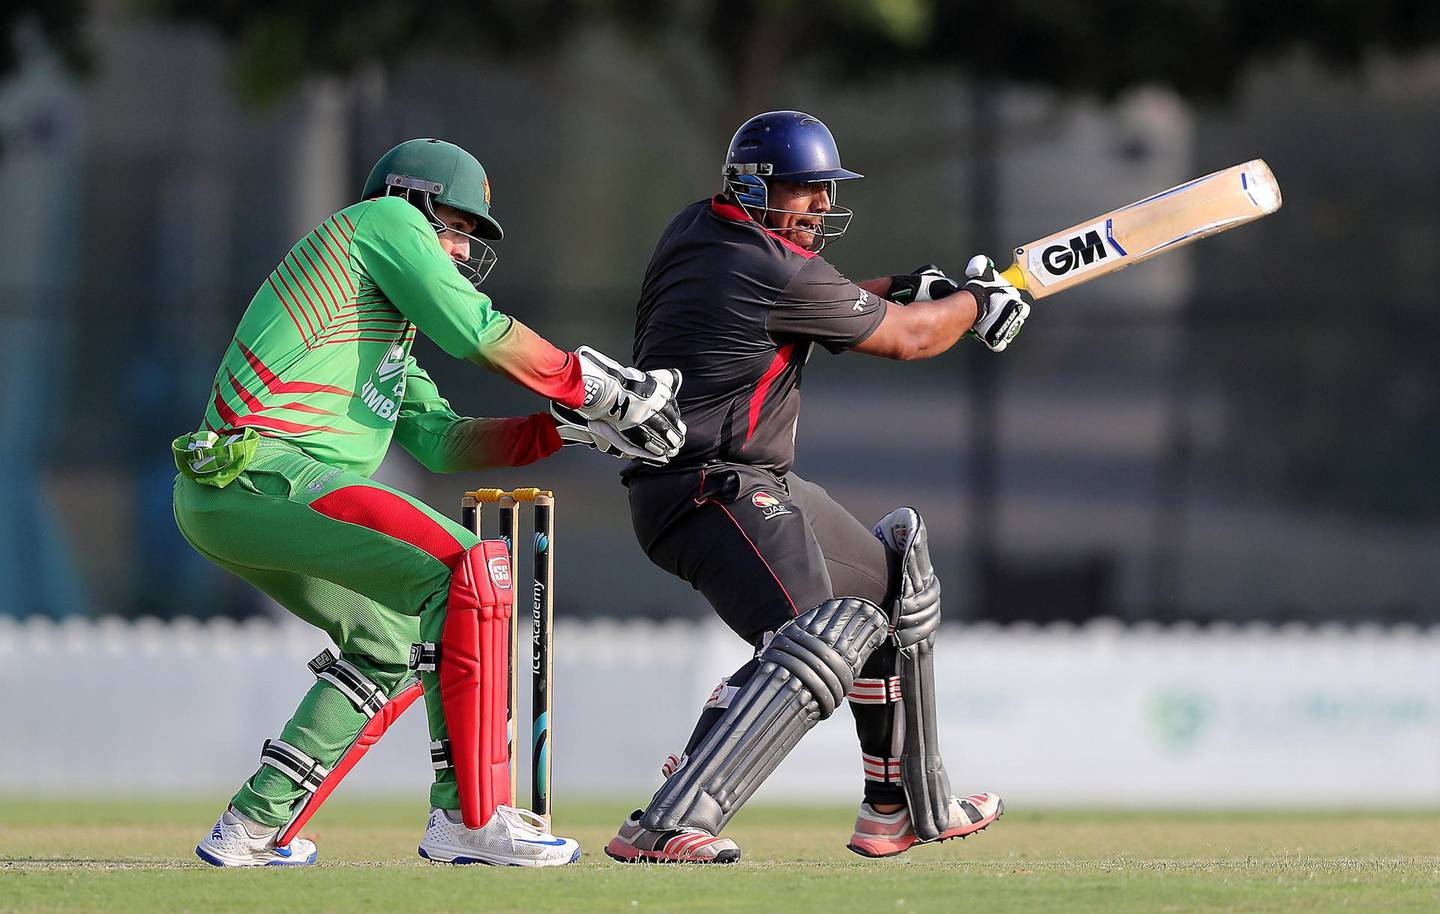 DUBAI , UNITED ARAB EMIRATES , NOV 16   – 2017 :-  Ashfaq Ahmed of UAE team playing a shot during the one day international cricket match against Zimbabwe A team at the ICC Academy in Dubai Sports City in Dubai. Also seen in the photo Peter Moor wicket-keeper of Zimbabwe A team. (Pawan Singh / The National) Story by Paul Radley